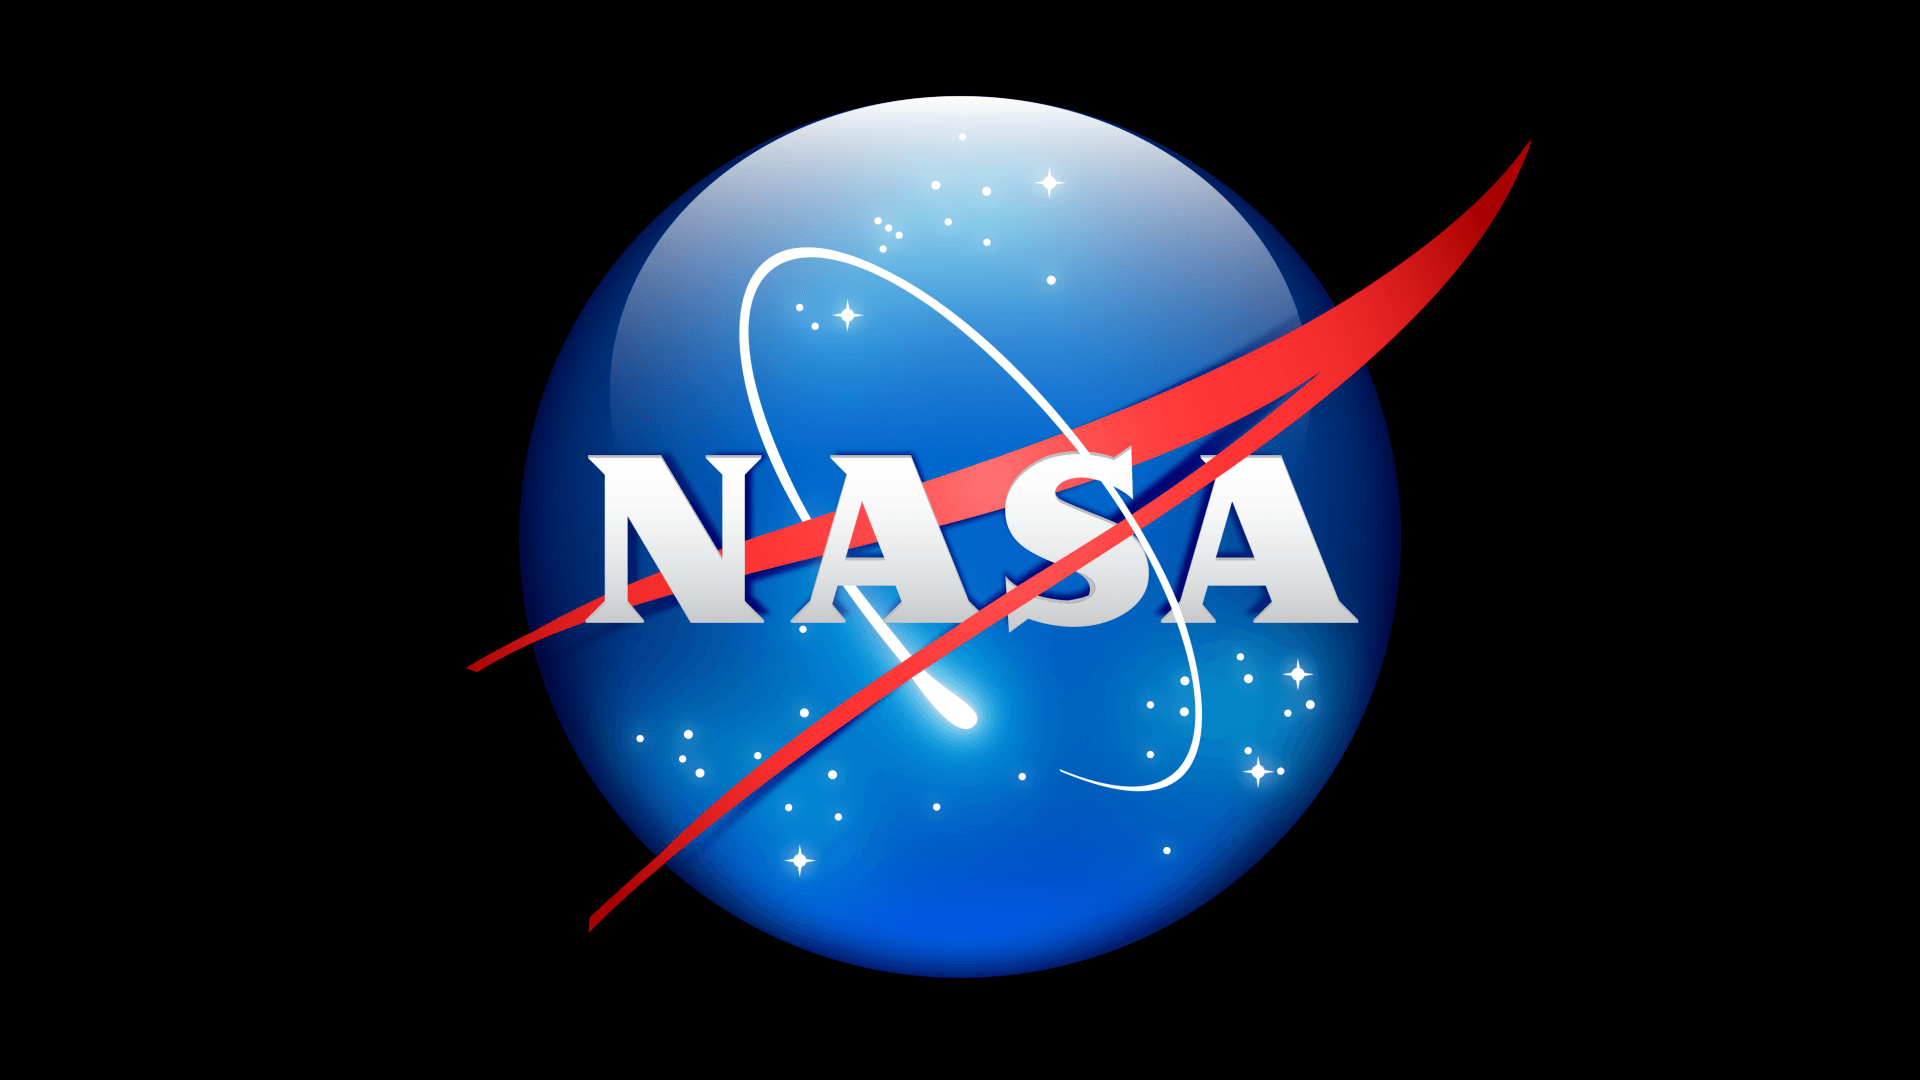 Use of NASA Logo - NASA Files Patent For Amorphous Amoeba Robots To Use In Space ...